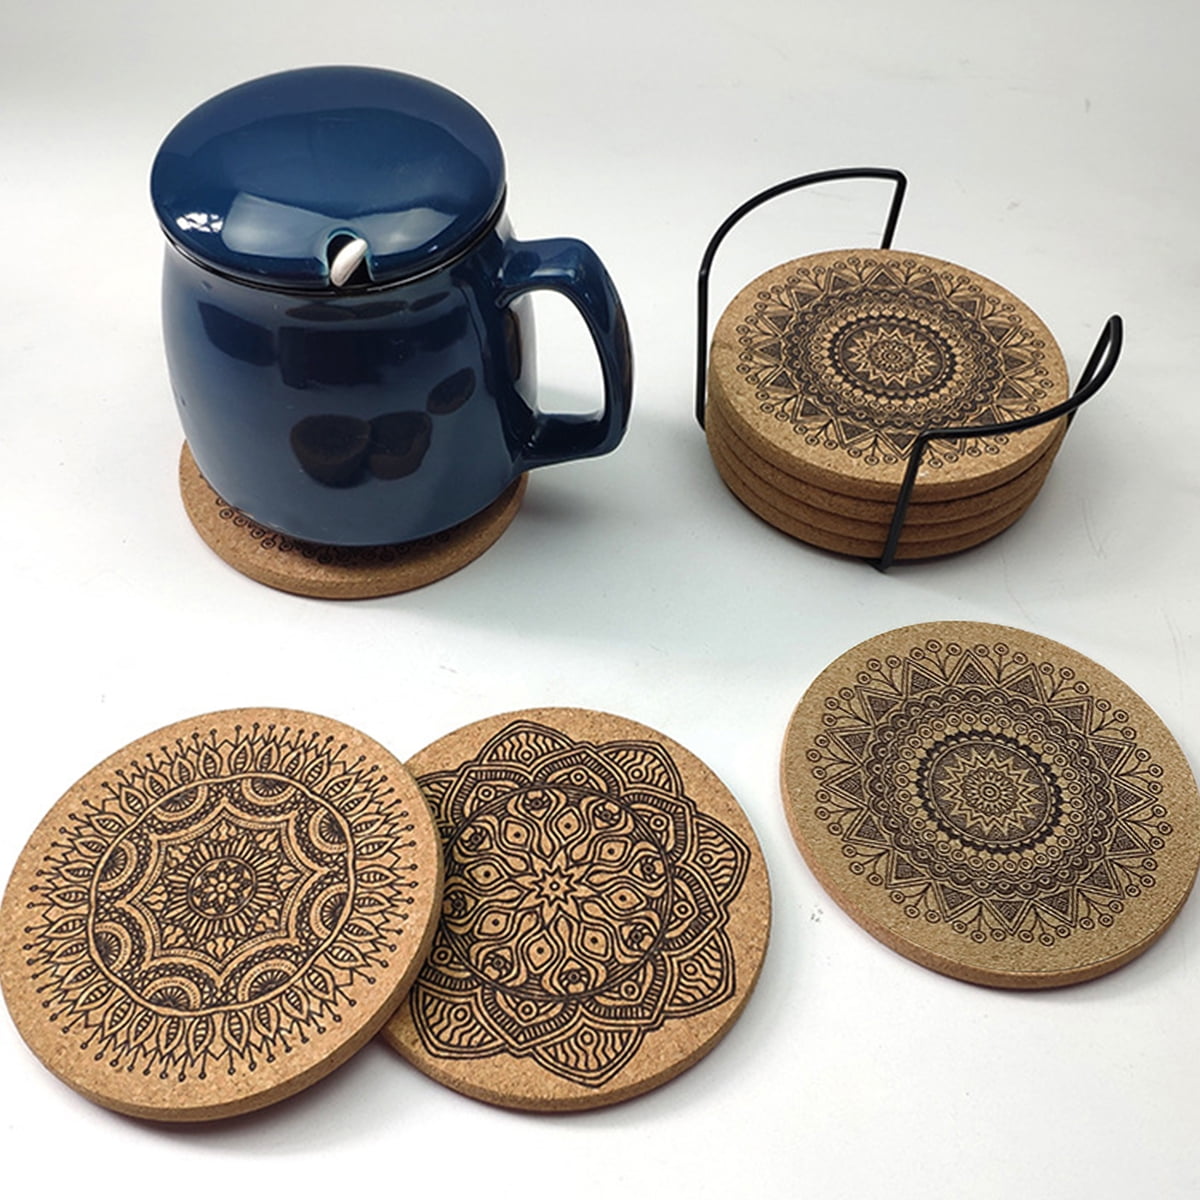  Didaey 200 Pcs Cork Coaster for Drink Absorbent Blank Coasters  Bulk Tea or Coffee Coaster Set 4 Inch Wooden Thick Cork Coasters for Wine  Glass Cup Mug DIY Crafts Office Home